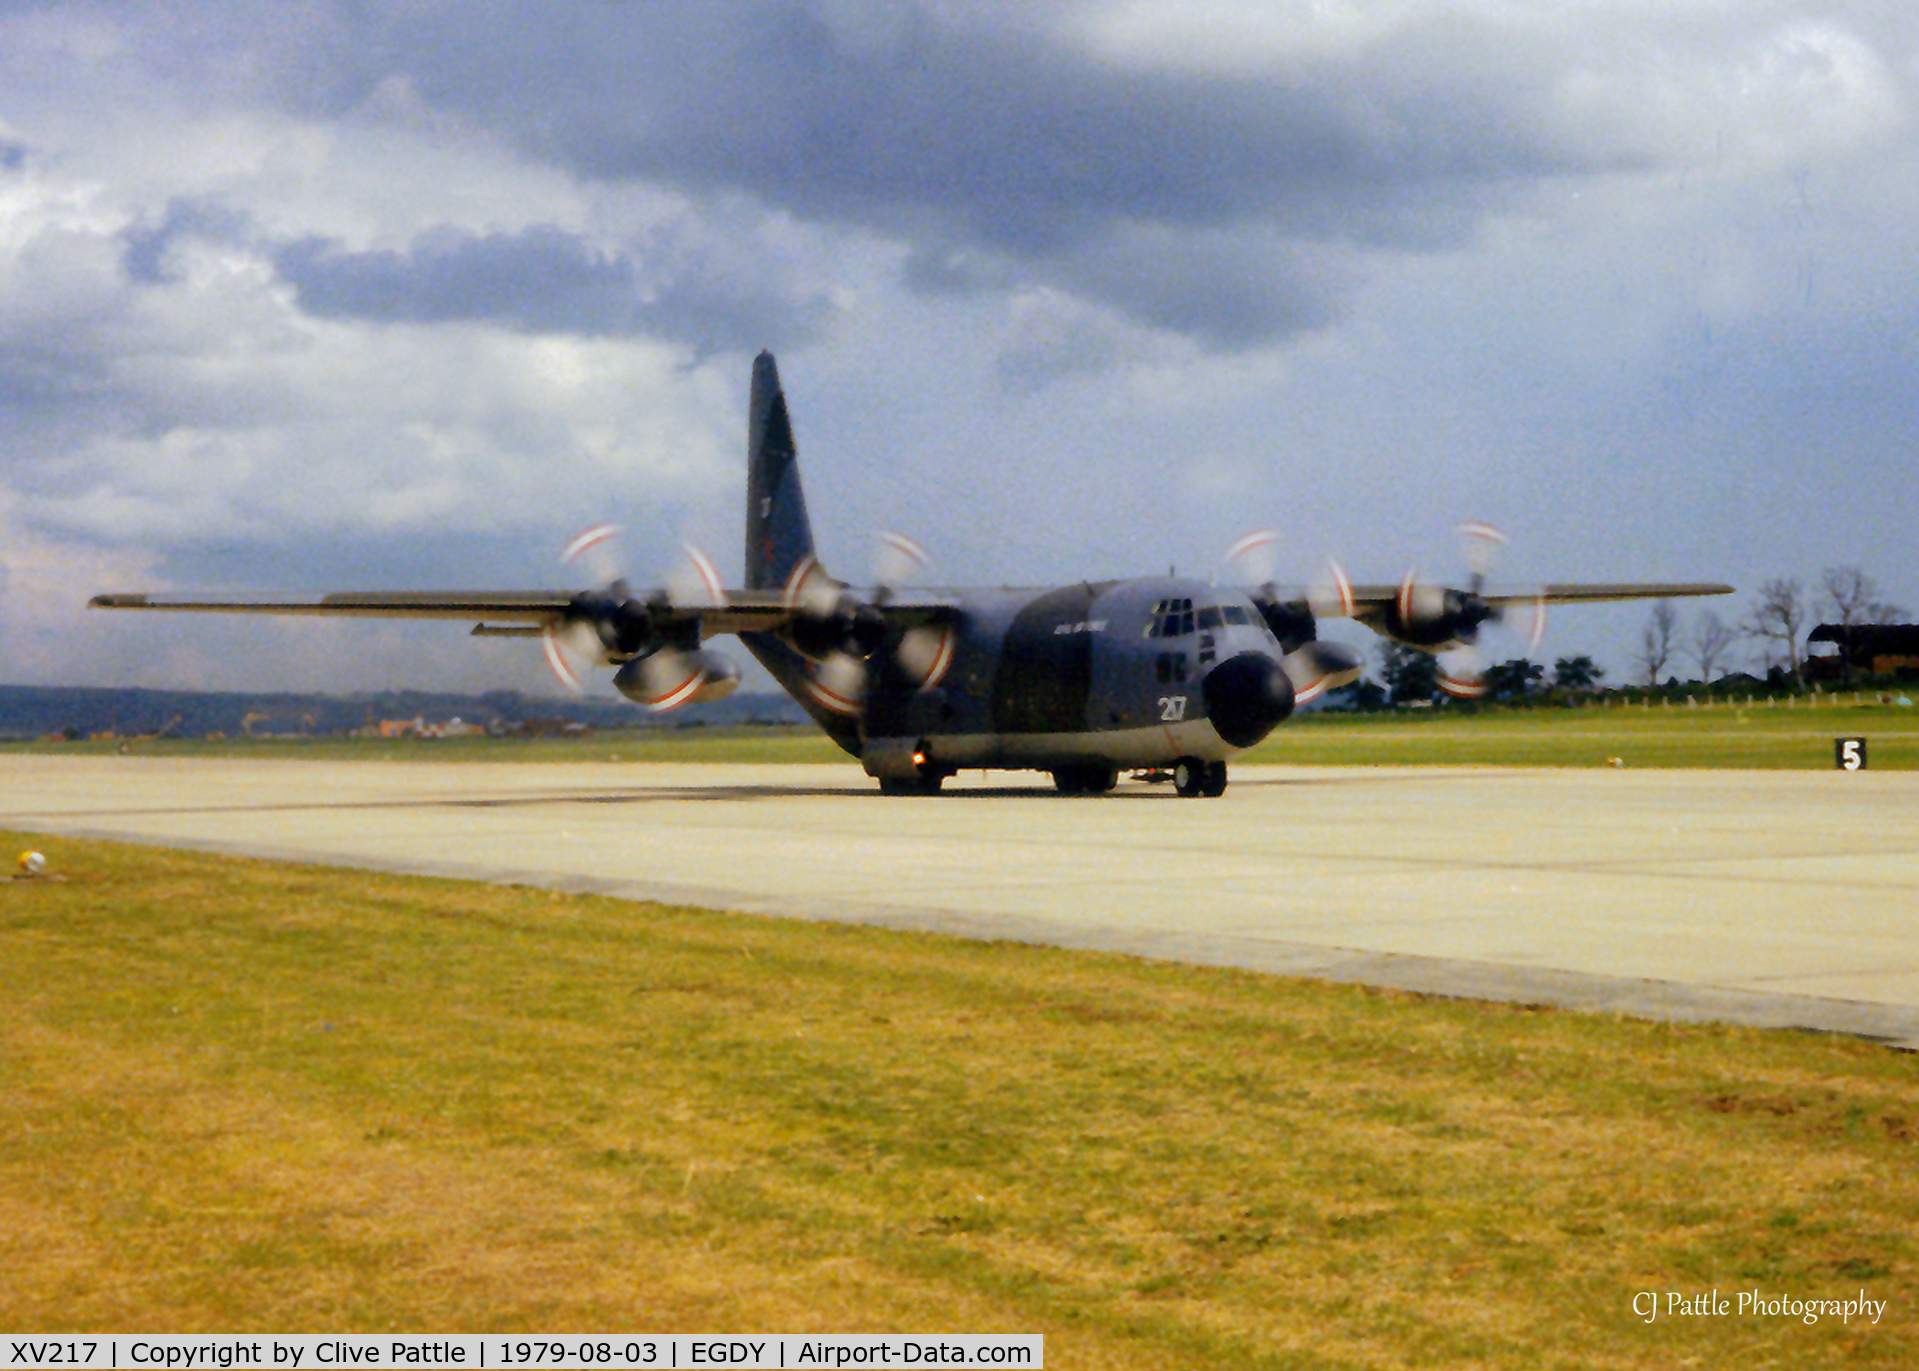 XV217, 1967 Lockheed C-130K Hercules C.1 C/N 382-4244, Scanned from print, Herc XV217 lands at RNAS Yeovilton  as the Red Arrows support aircraft for Air Day '79.